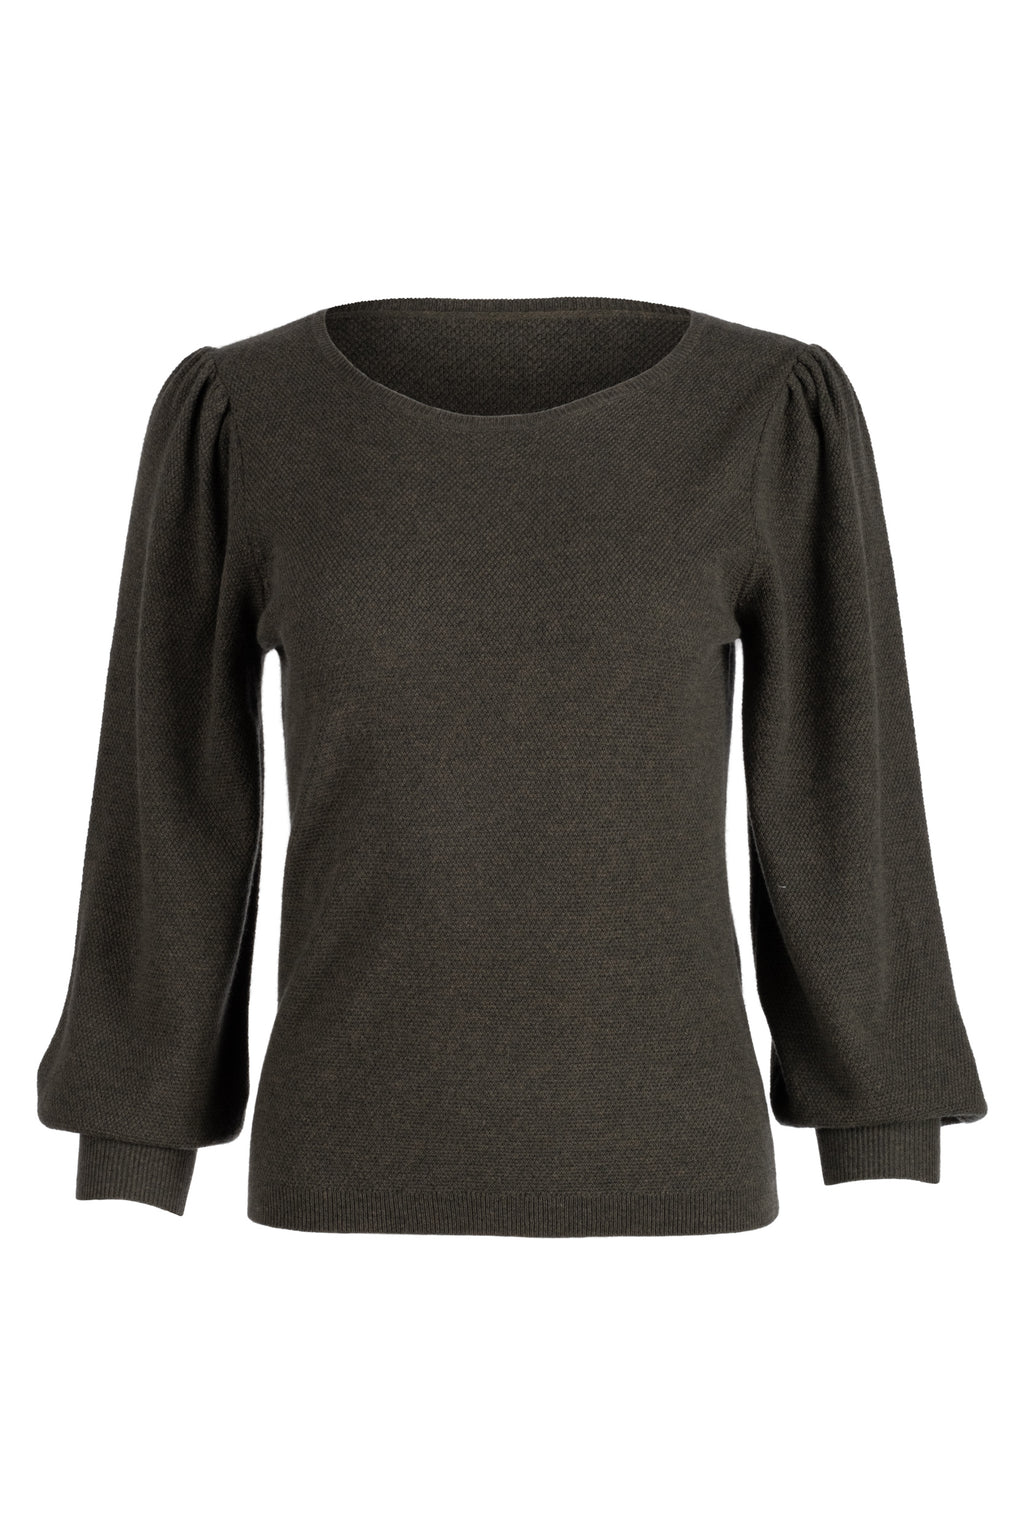 Ruched Long Sleeve Sweater - Olive